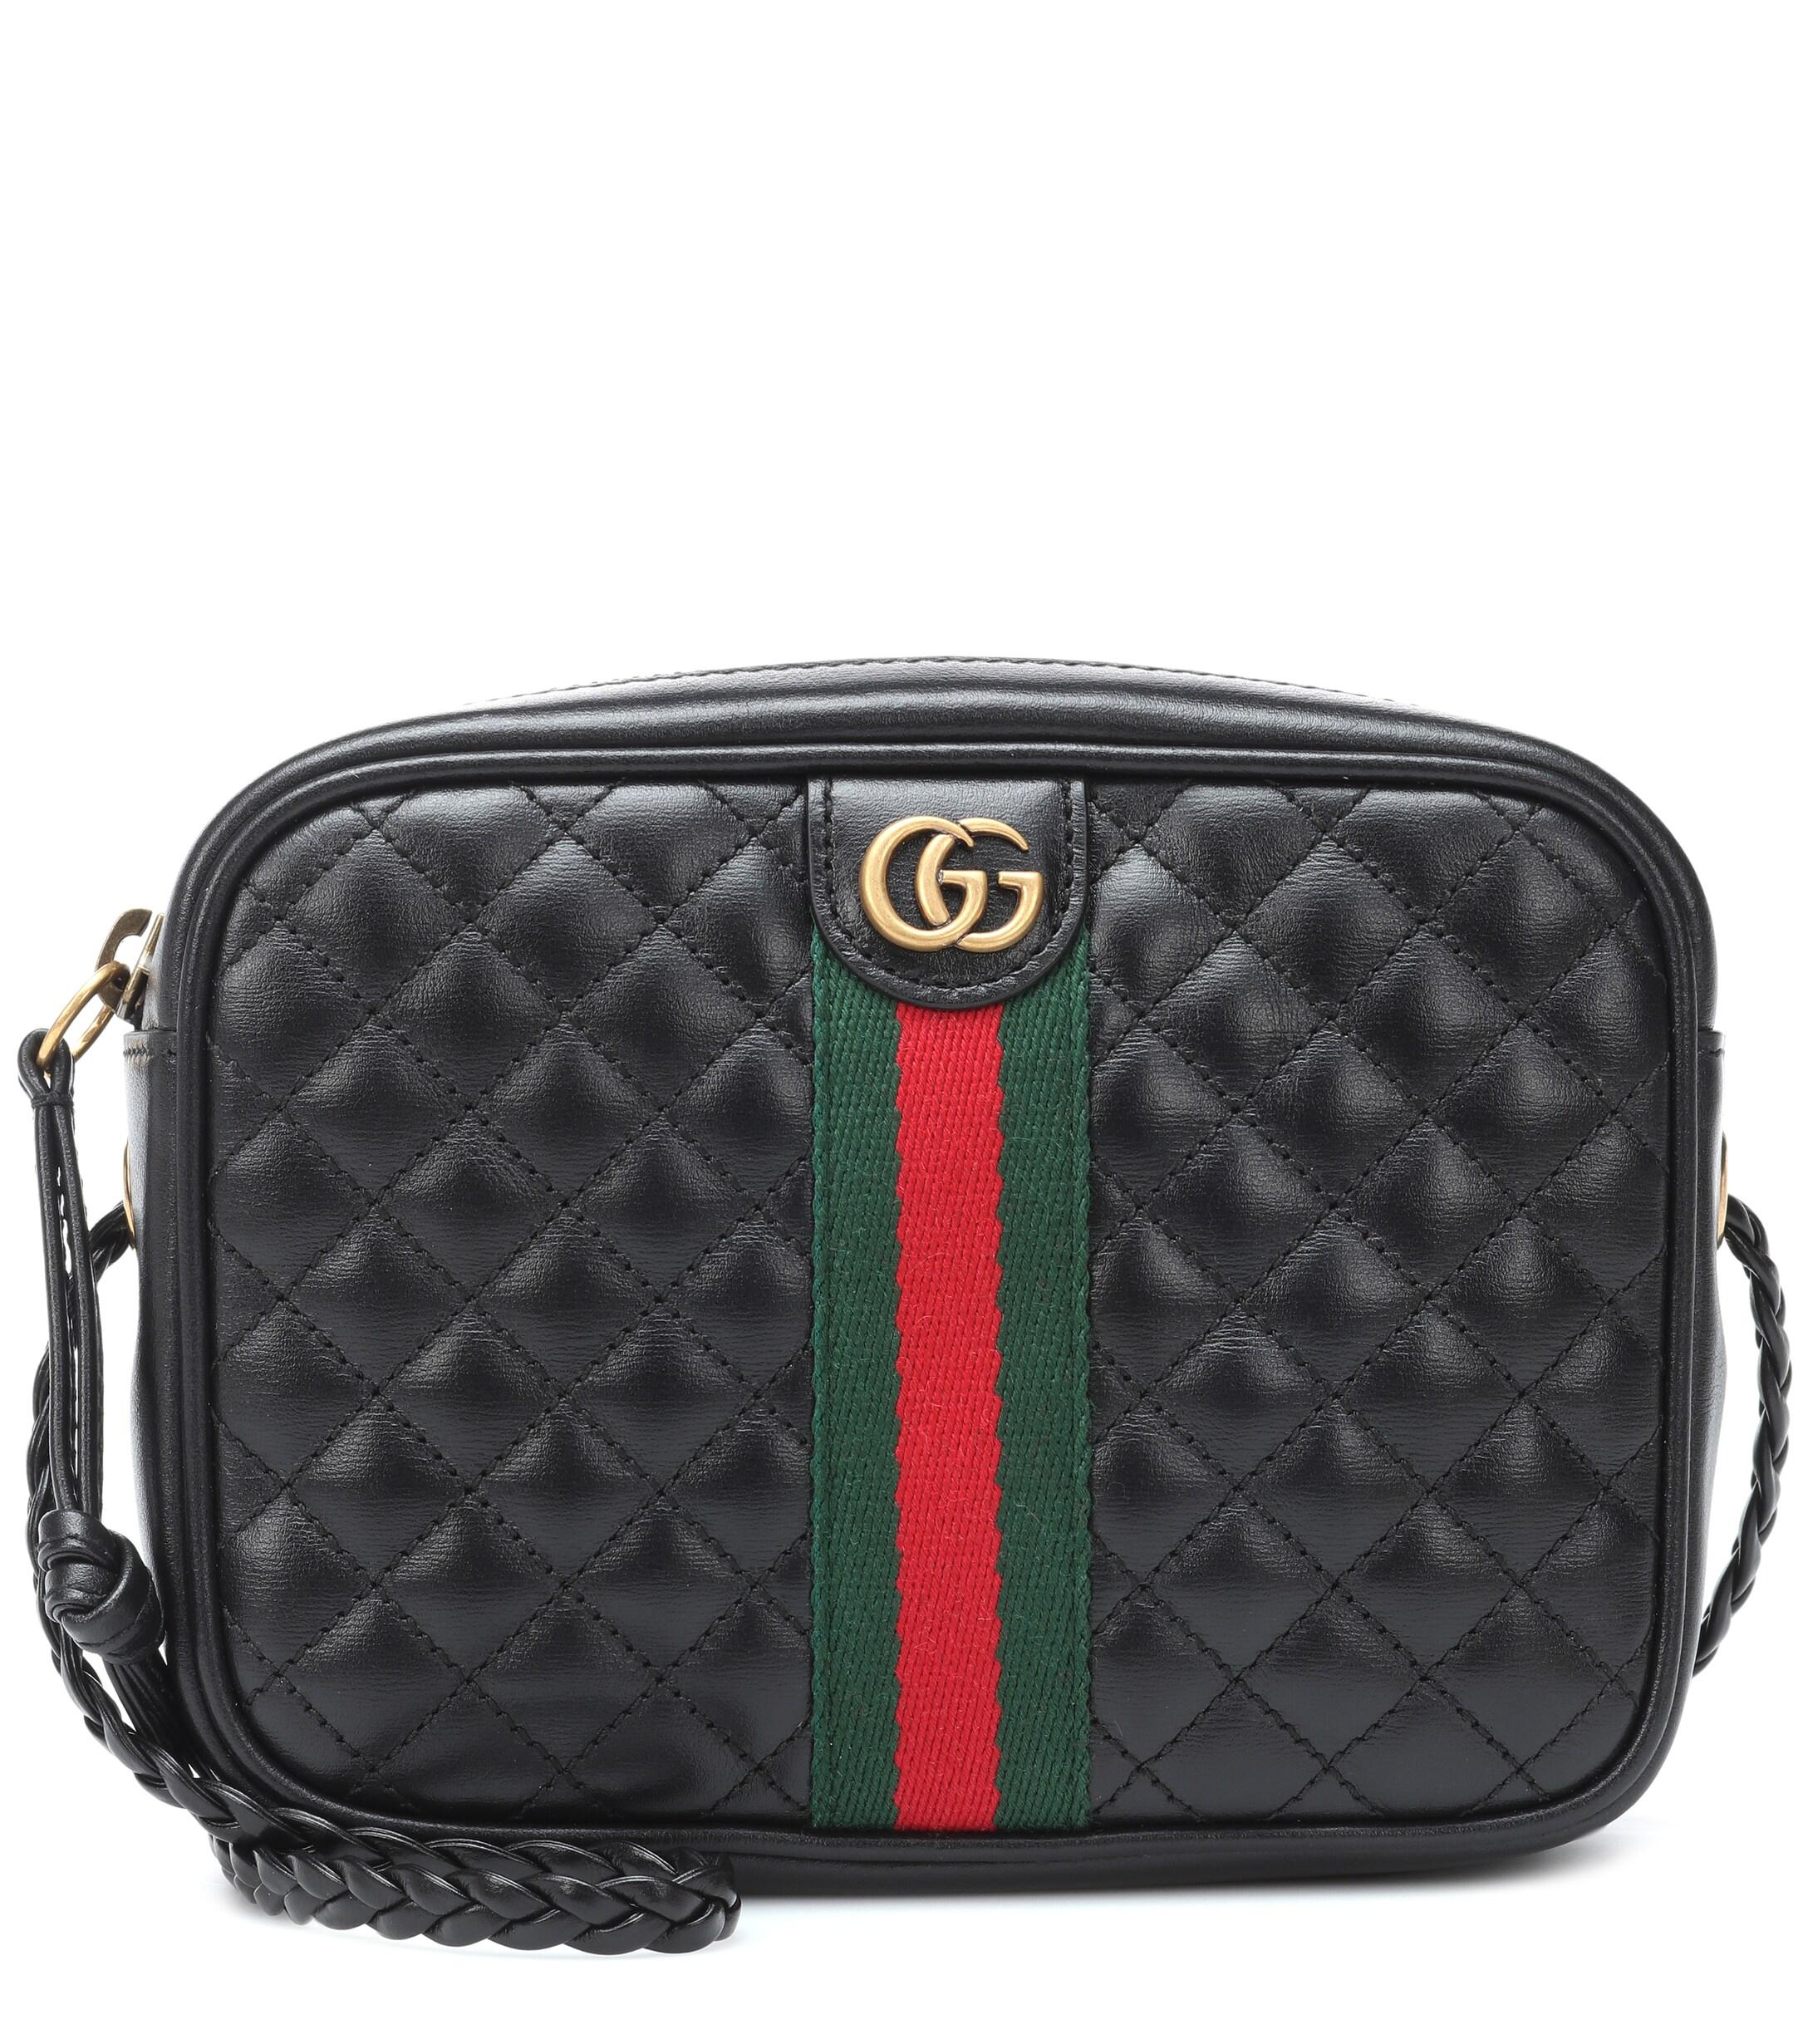 Gucci Quilted Leather Shoulder Bag in Black - Save 25% - Lyst